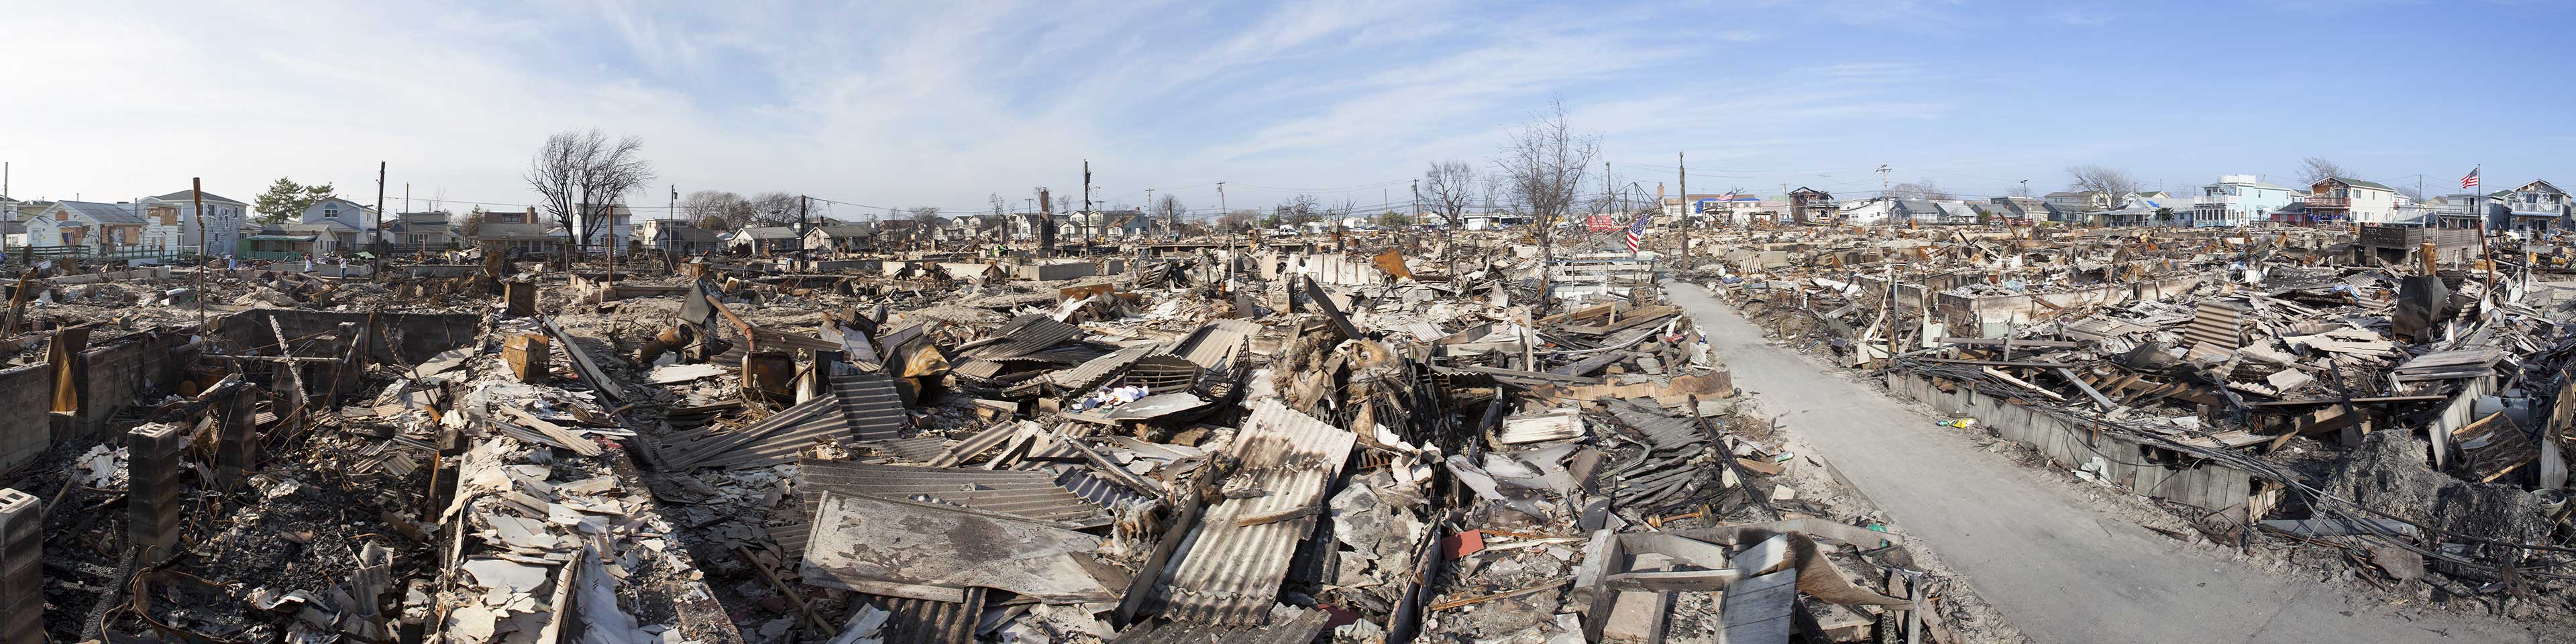 Mississippi, South Carolina, and Tennessee disaster relief